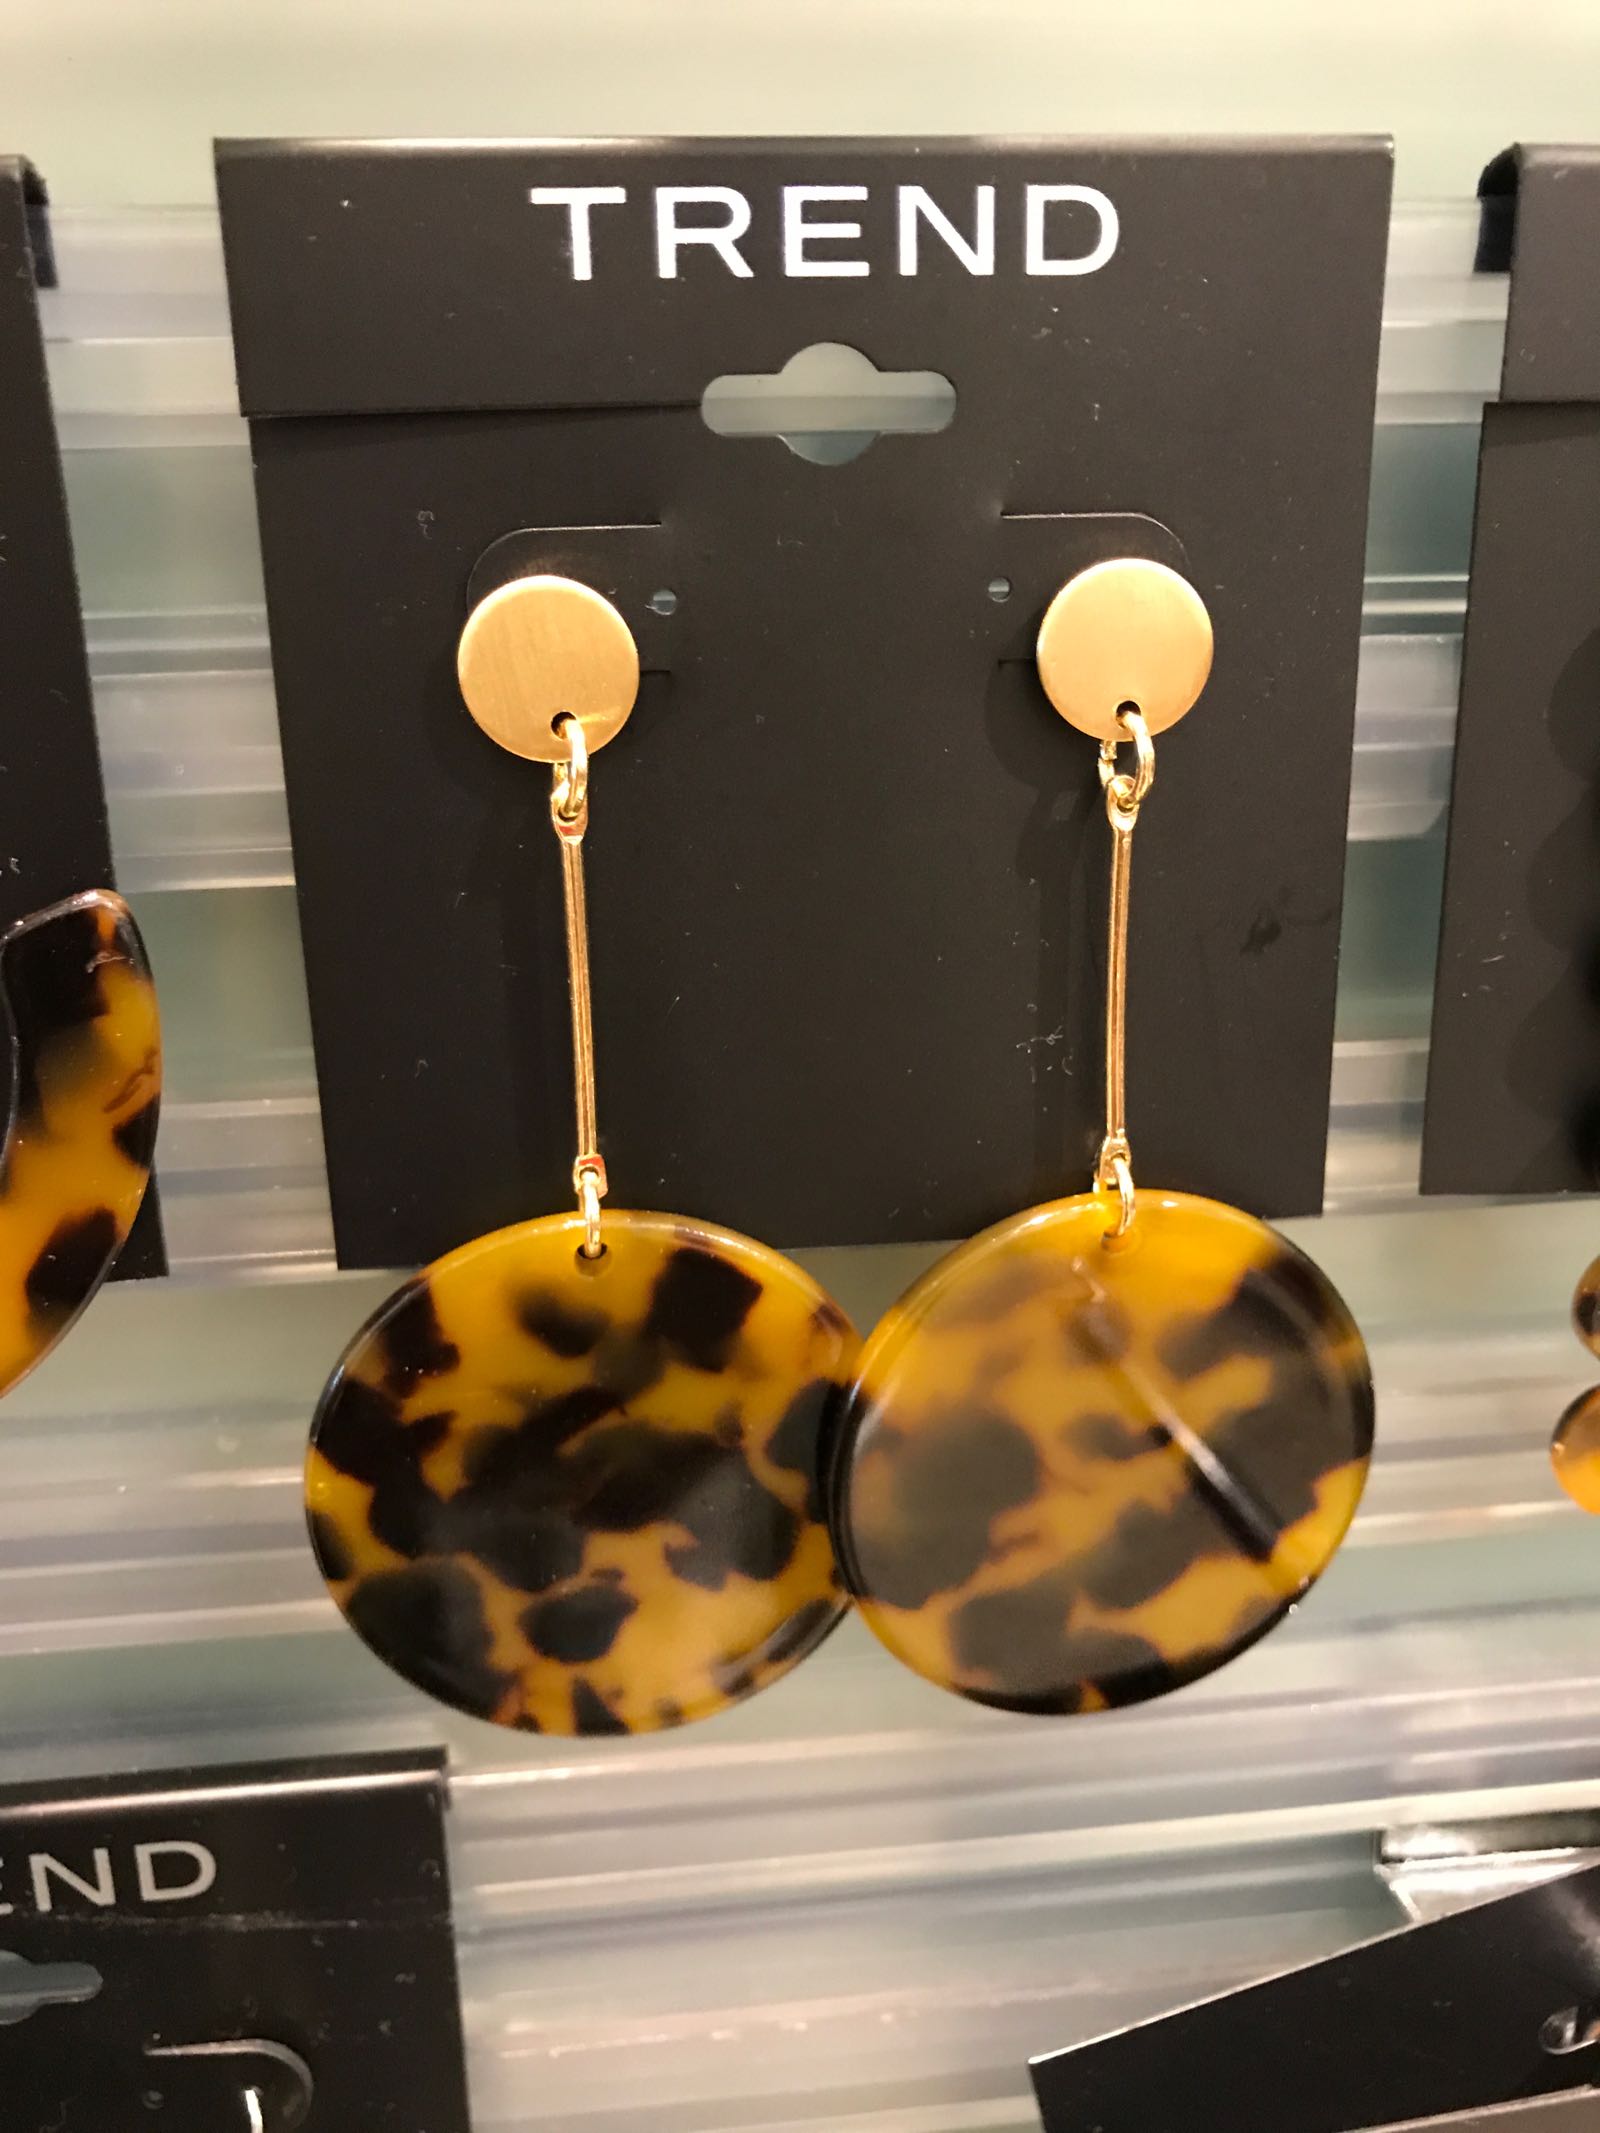 Jewelry that looks like J.Crew and BaubleBar at Kohl's!